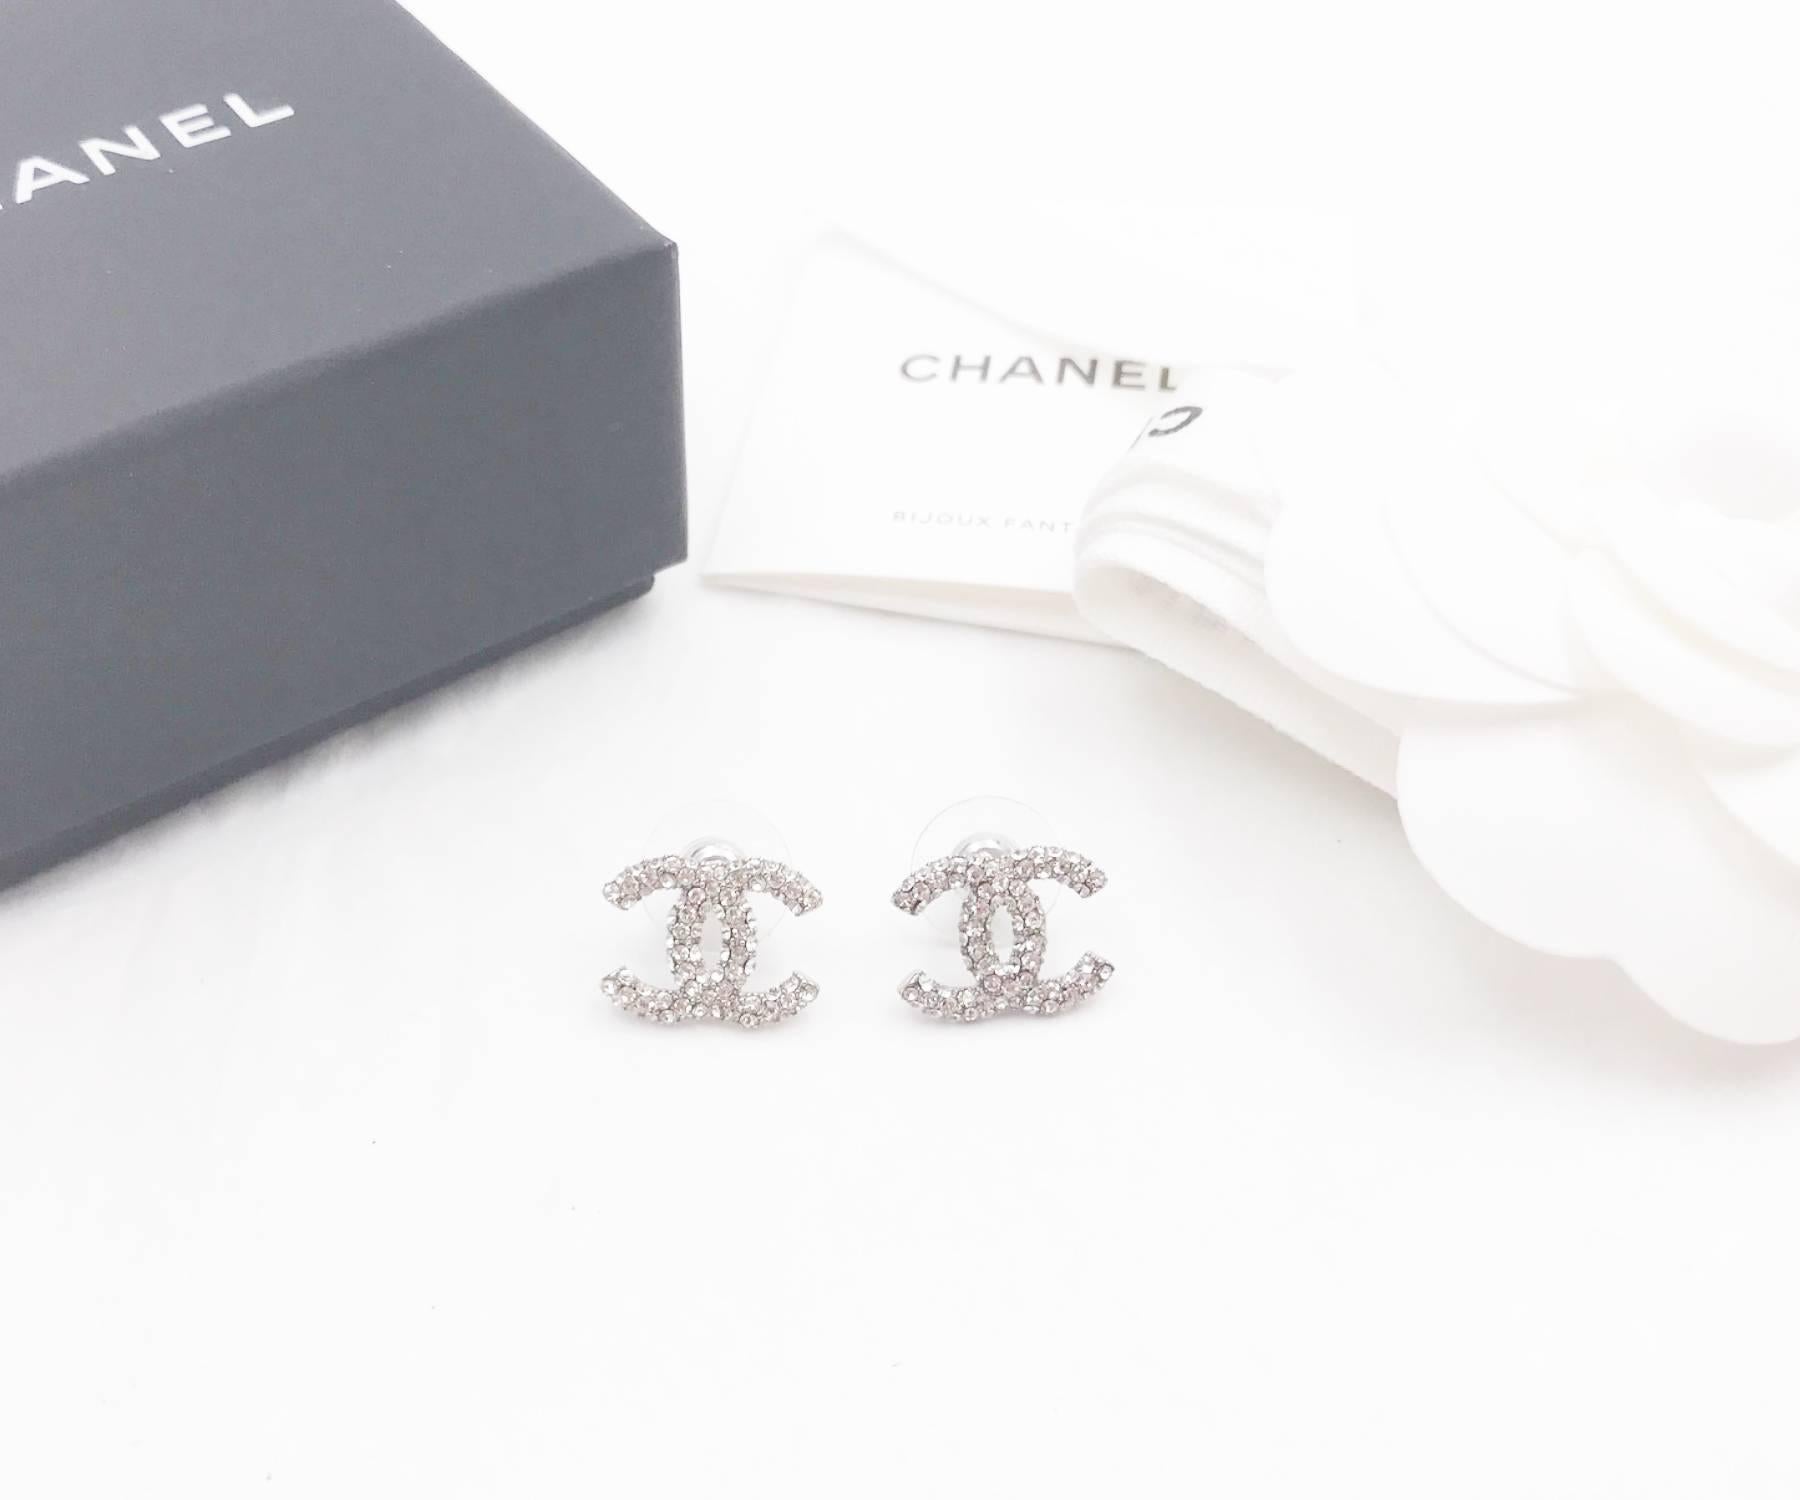 Chanel Silver CC All Over Crystal Piercing Earrings

*Marked 20
*Made in Italy
*Comes with the original box, pouch and booklet

-Approximately 0.6